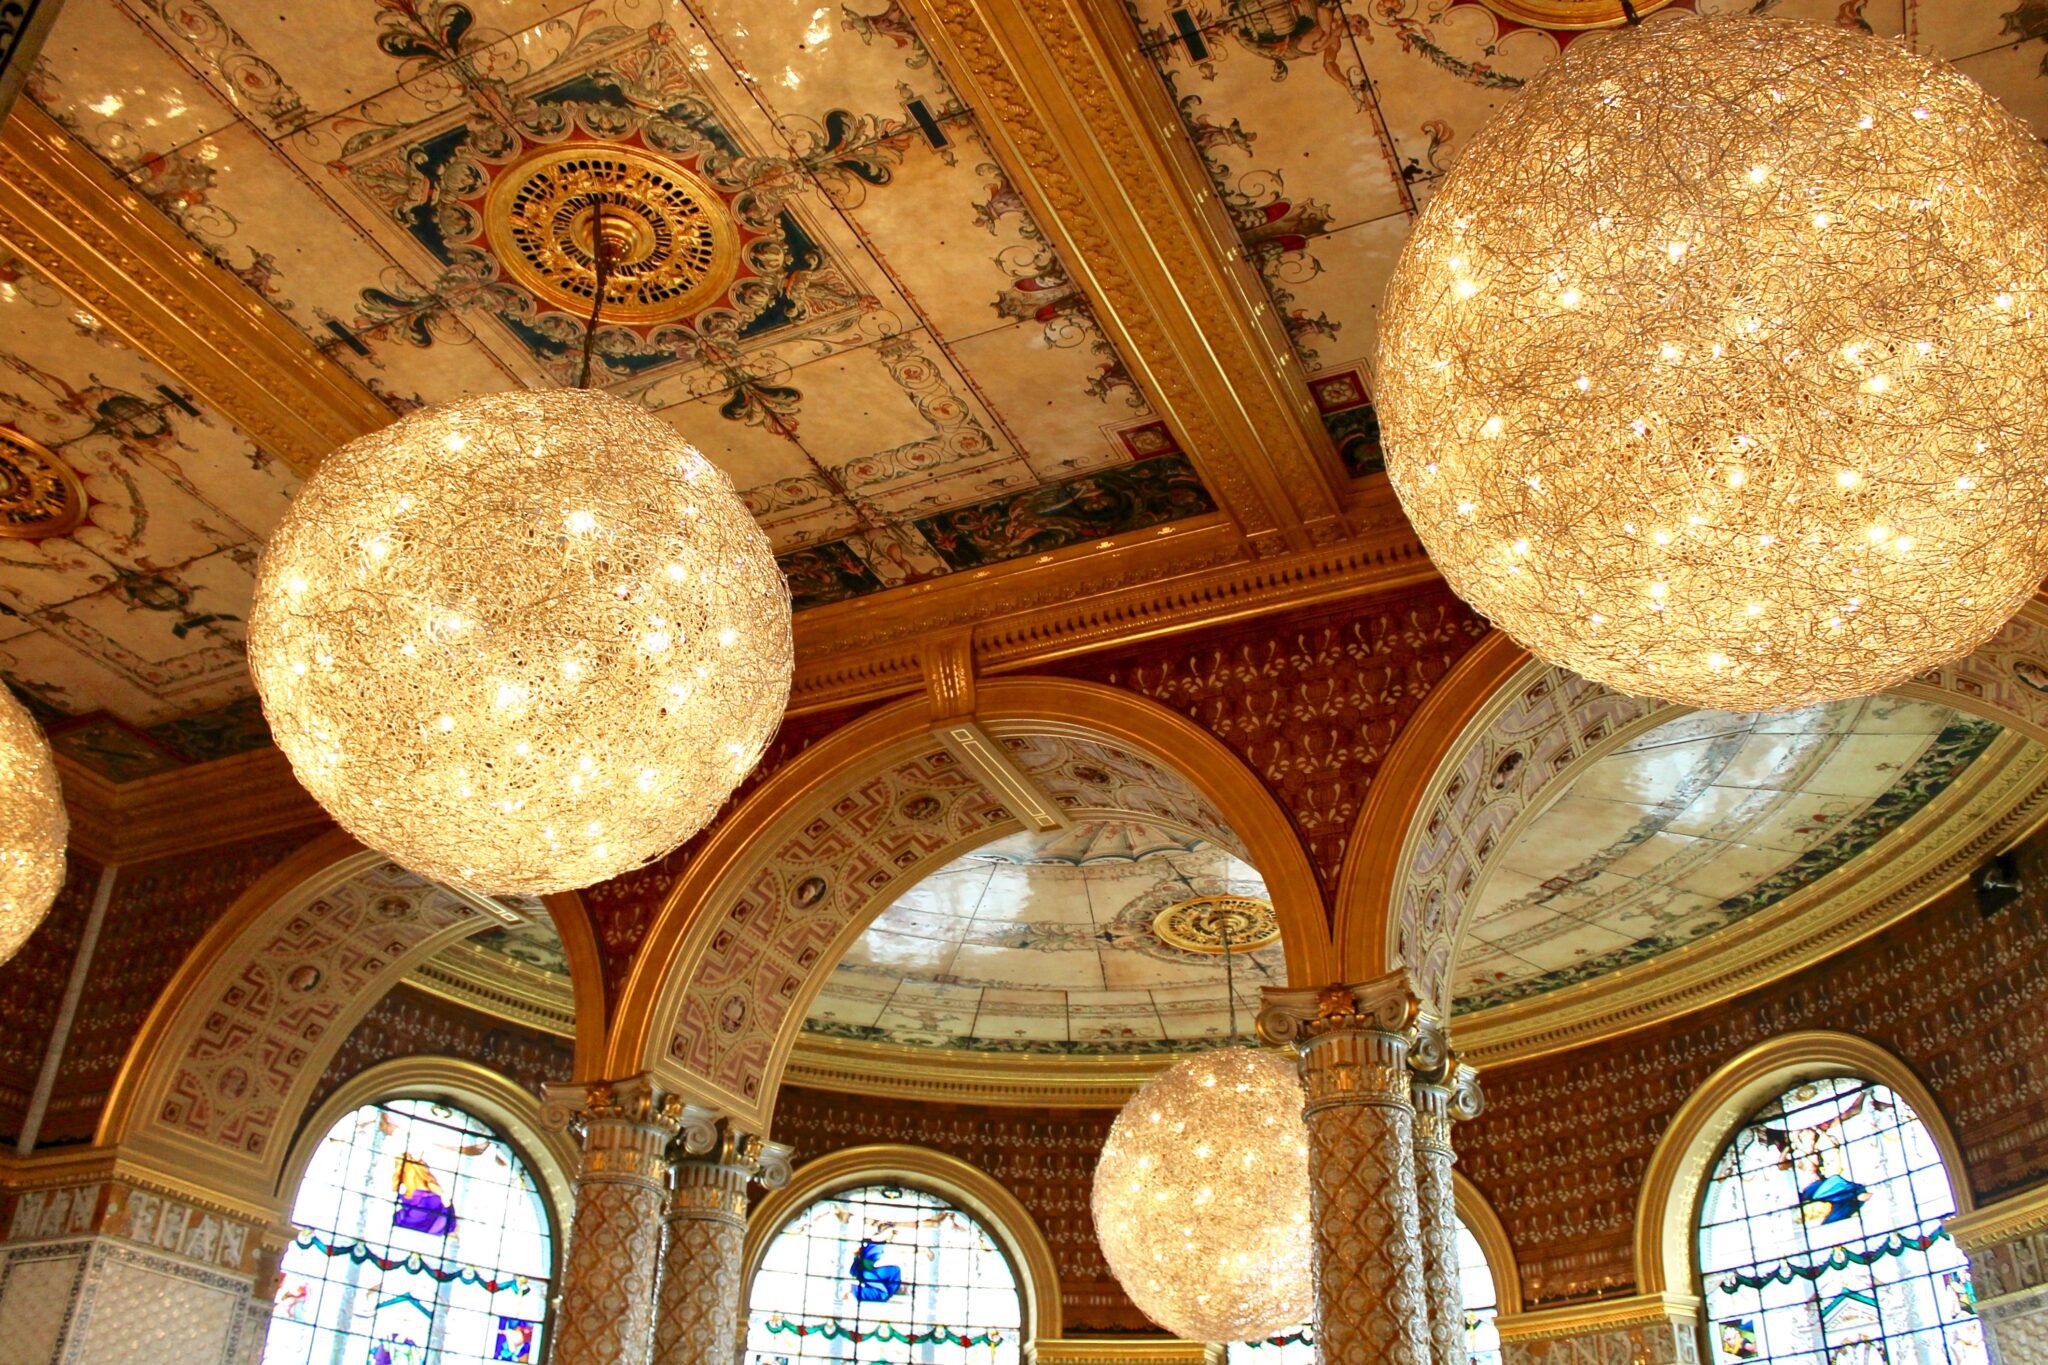 victoria and albert museum cafe